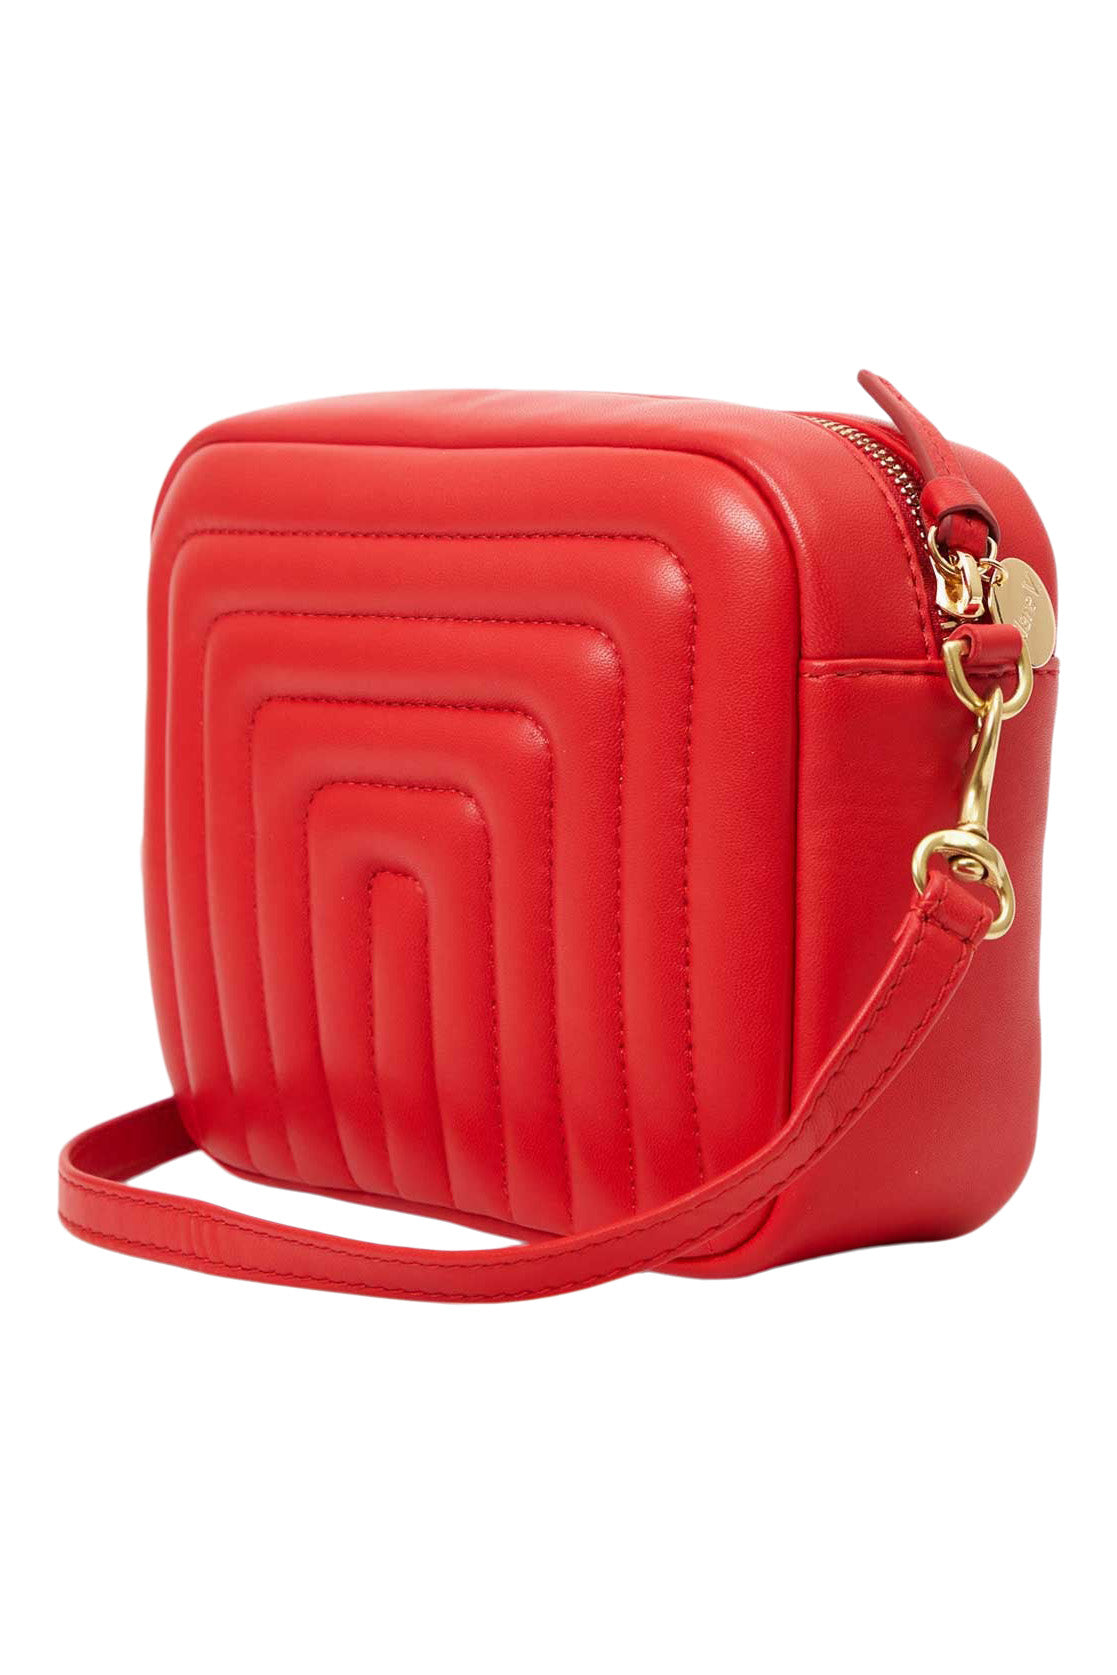 Clare V. Midi Sac in Rouge Channel Quilted